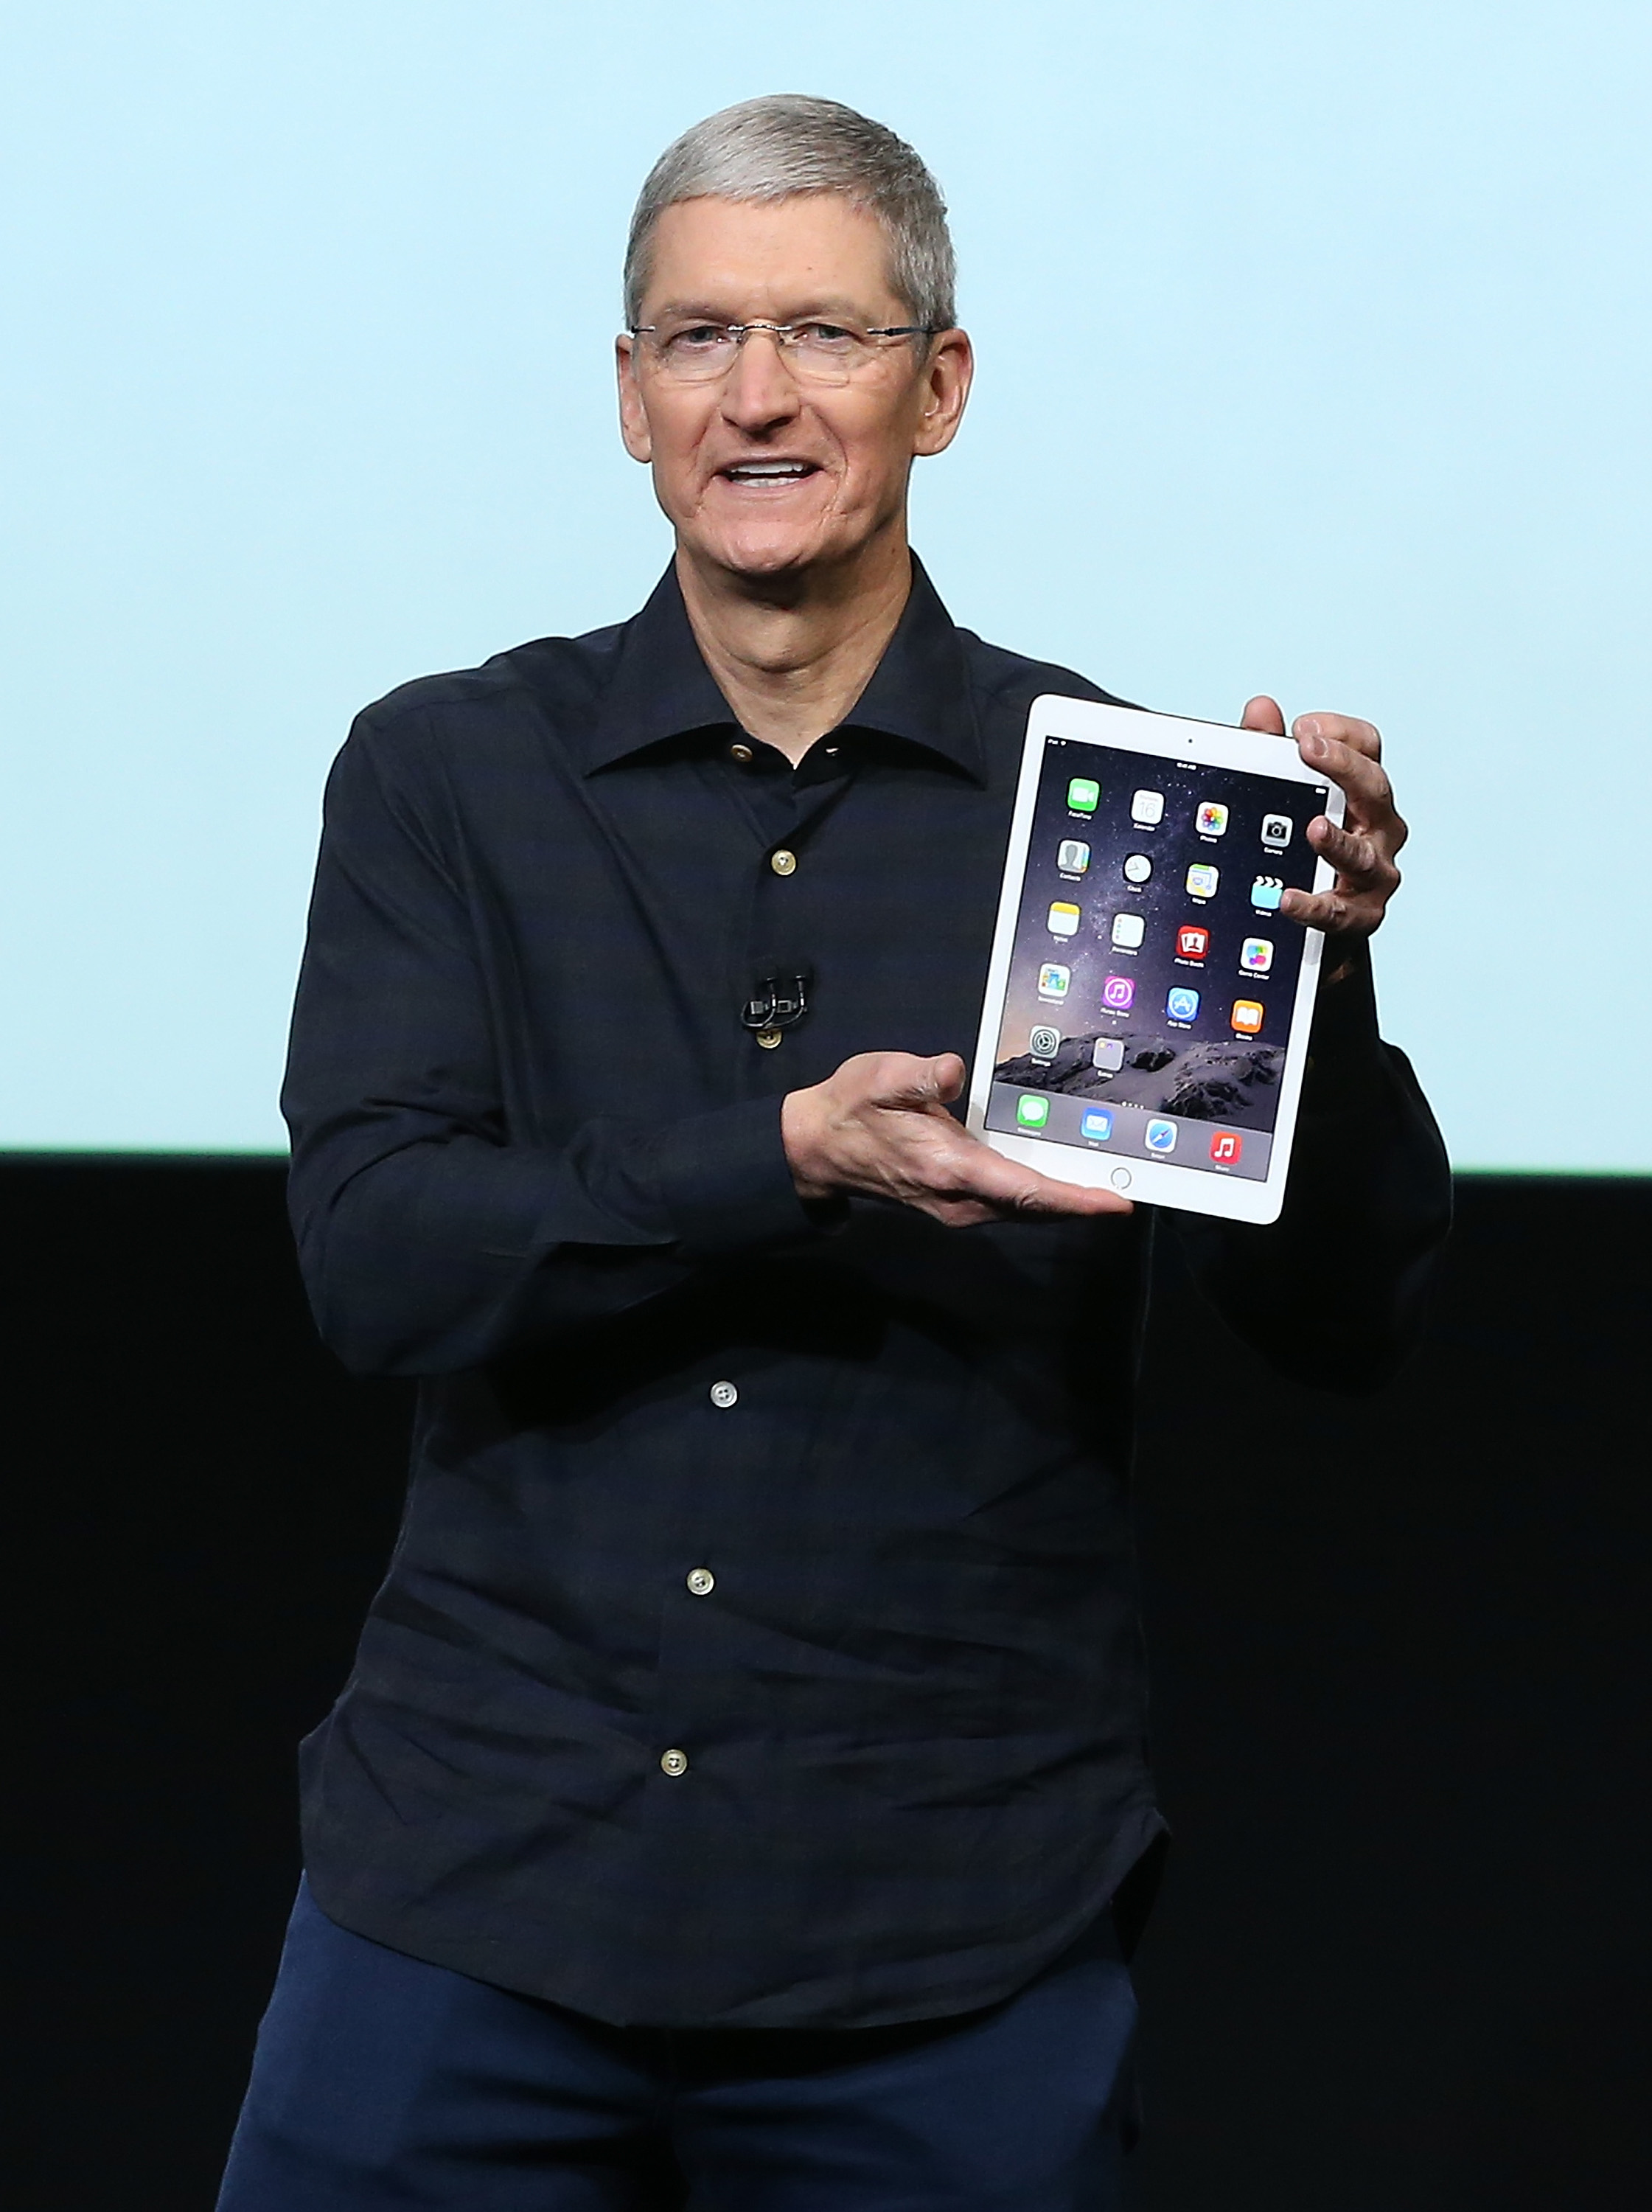 Apple CEO Tim Cook holds the new iPad Air 2 during a special event on Oct. 16, 2014 in Cupertino, Calif. (Justin Sullivan&mdash;Getty Images)